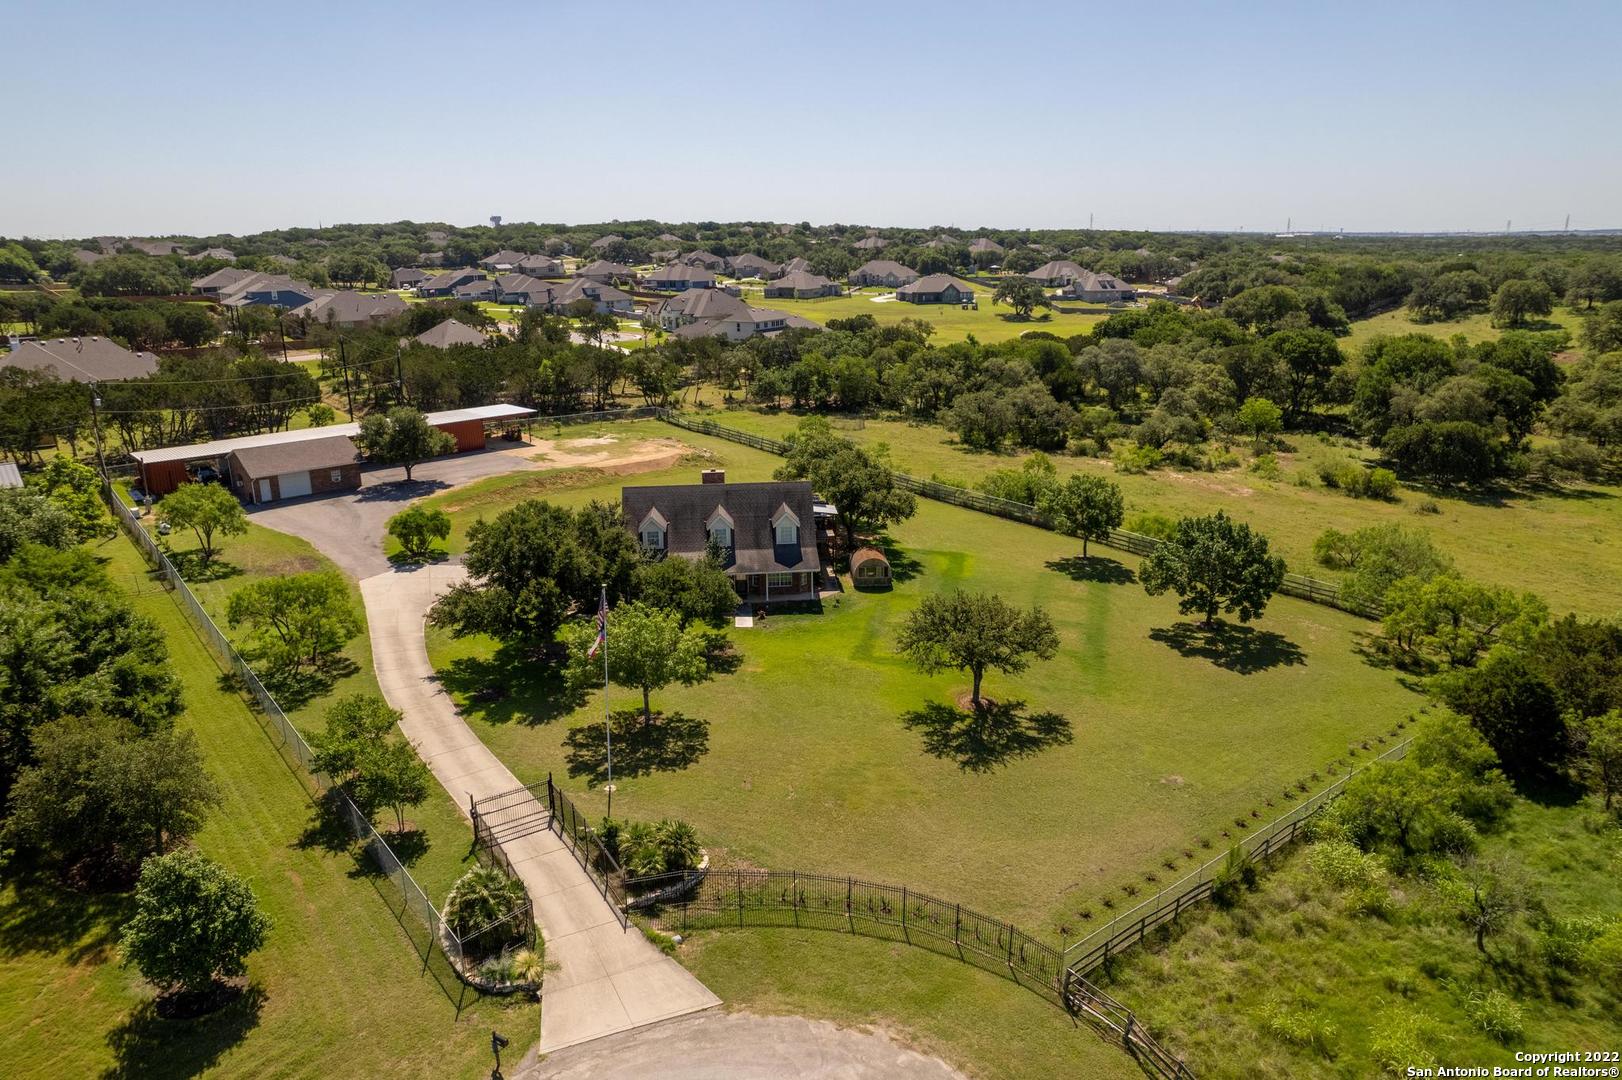 Welcome to Paradise! Located in Comal County, just on the outskirts of San Antonio & Garden Ridge, resides this fascinating, unique residence. You'll be amazed at all the wonderful opportunities this countryside estate has to offer. Impressive home on almost two acres is situated on a private, dead end, cul-de-sac street with no mandatory HOA & no city taxes. The level lot is rectangular in shape, manicured and beautifully landscaped and completely fenced with an impressive wrought iron driveway gate. The long concrete driveway welcomes you to a two story, all brick home with a new roof,  front & back covered patios & an attached two car garage. The home features a comfortable, flexible floor plan with a "mother-in-law" guest suite. Seamless flowing layout, beautiful hardwood flooring, wood-burning fireplace, high ceilings and a master bedroom downstairs. There is also a detached, oversized garage with an overhead electric door currently being used as a workshop, two additional carports for open, covered parking and two RV hook-ups - both under cover with 240V electrical service. Recently installed a 24KW Generac home generator with a 250 gallon propane tank,  2500 gallon water storage tank set on a concrete, heavy duty pad, and two new ac/heat pump systems. Must See!